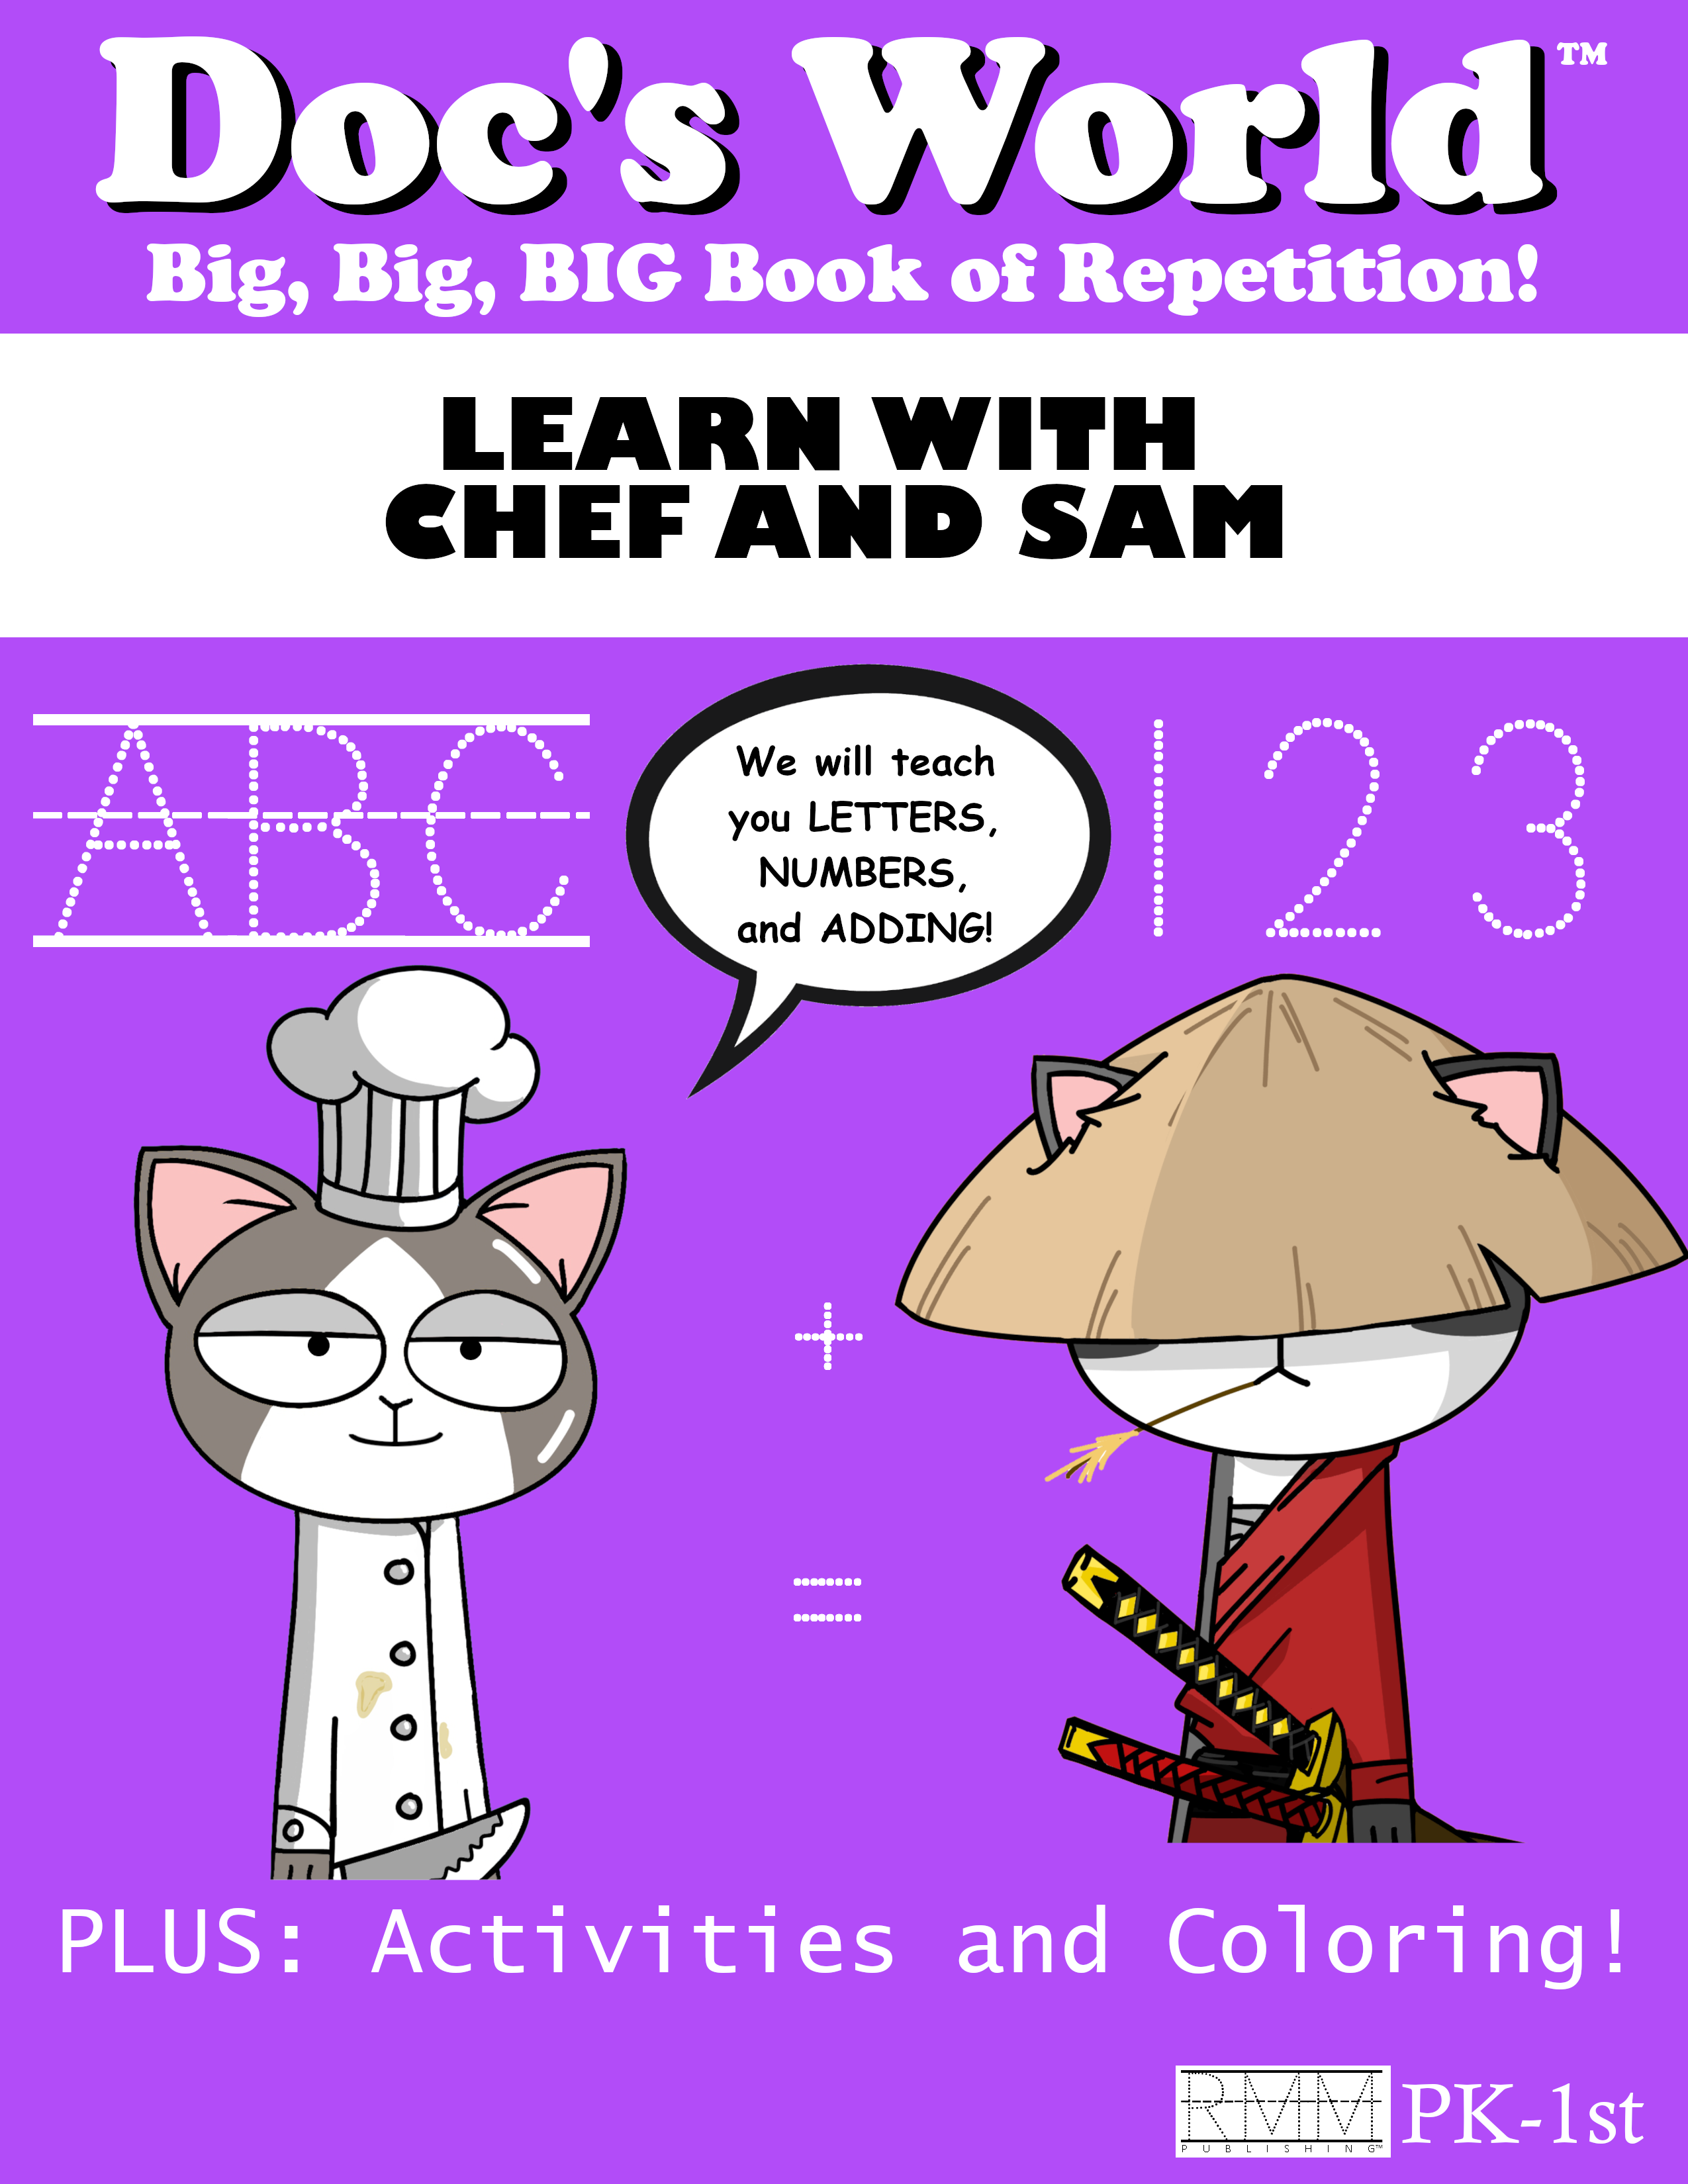 Chef and Sam Cover 1